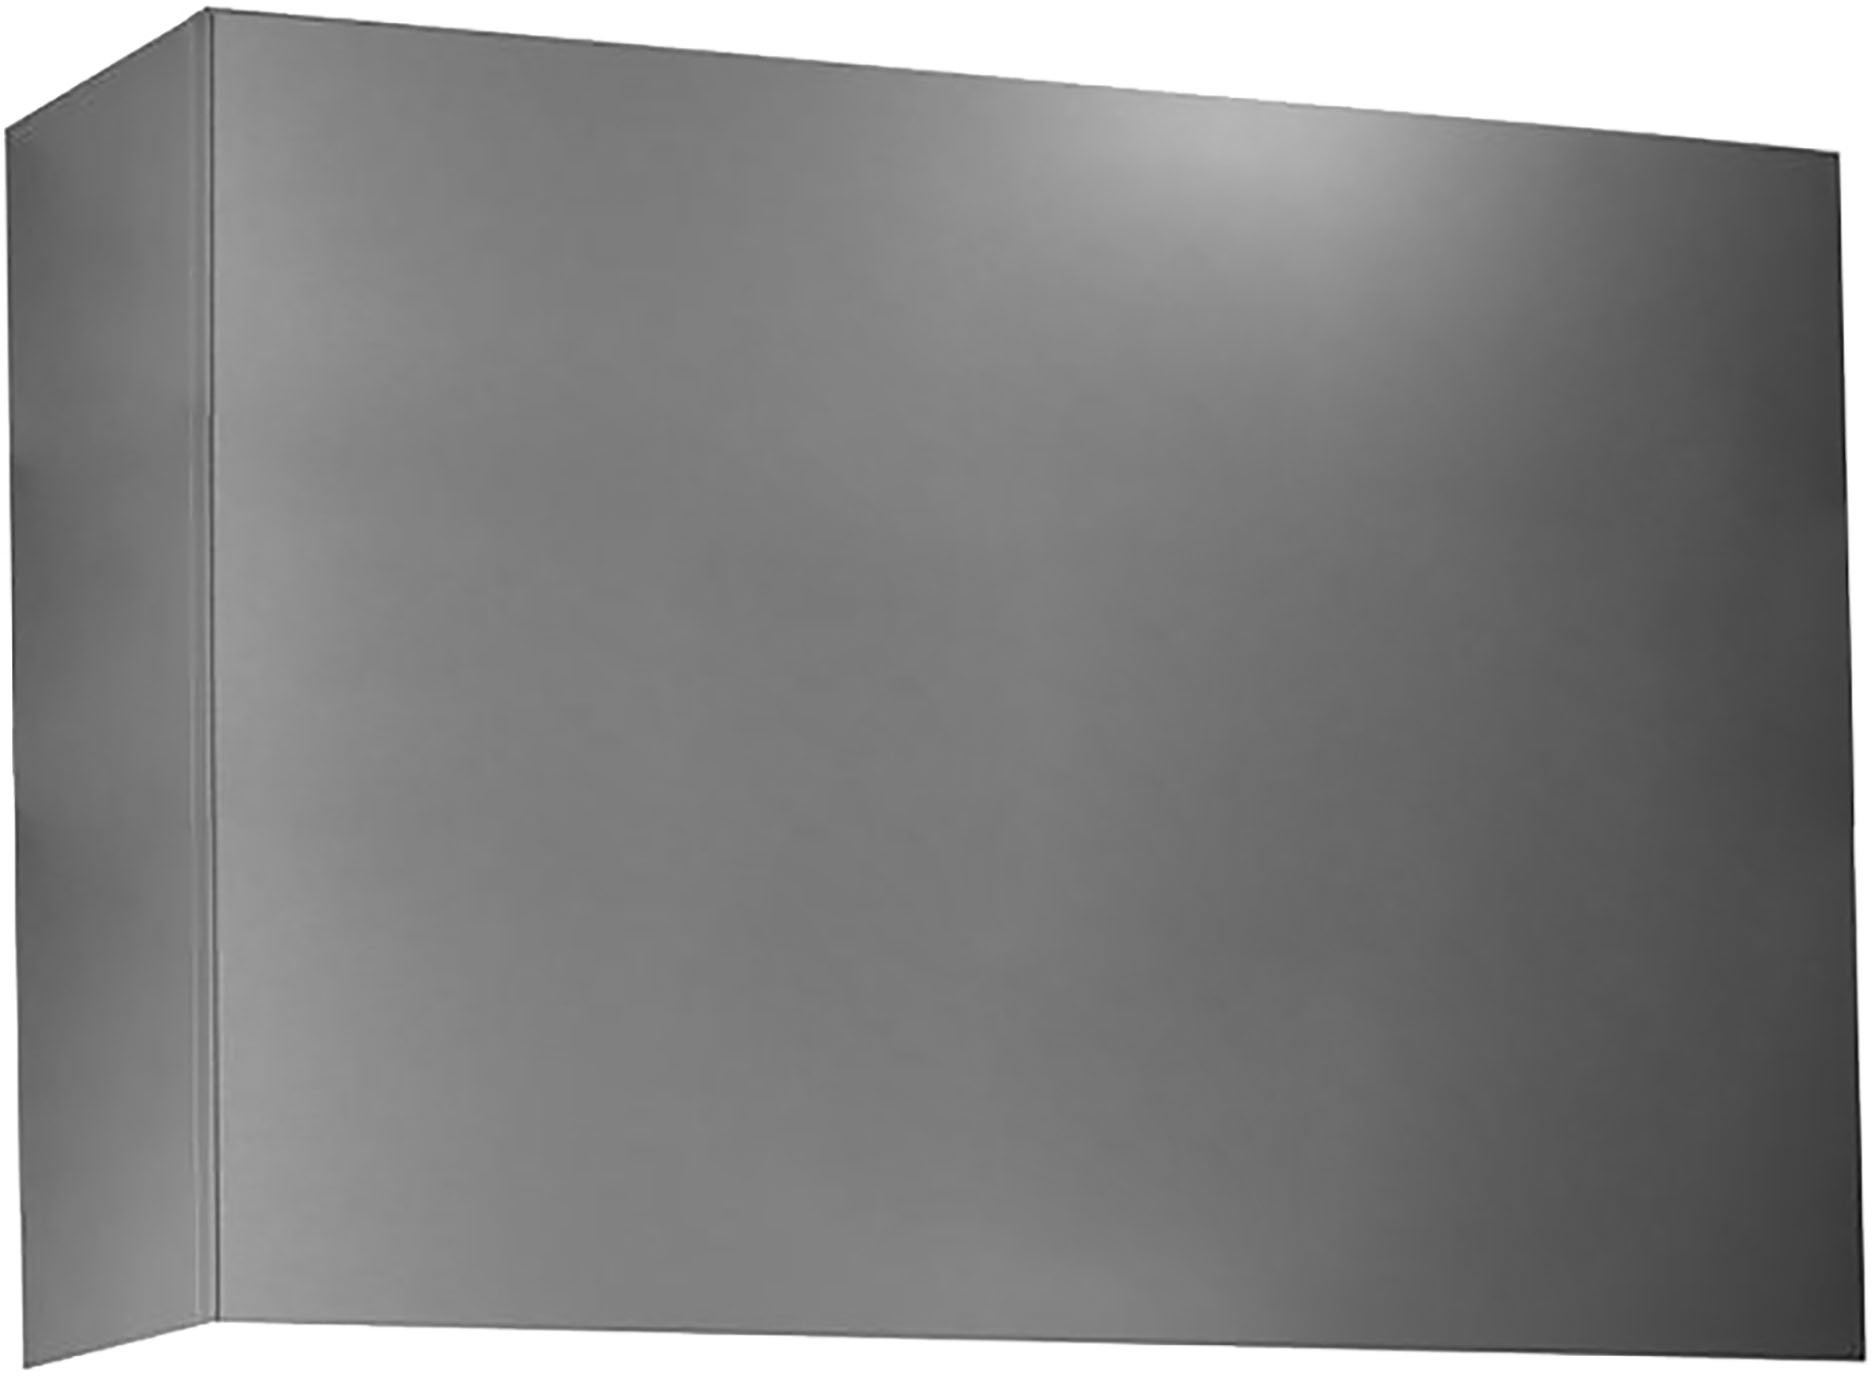 Angle View: Zephyr - Duct Cover Extension for AK7048CS and AK7548CS in Stainless Steel for Range Hood - Stainless steel